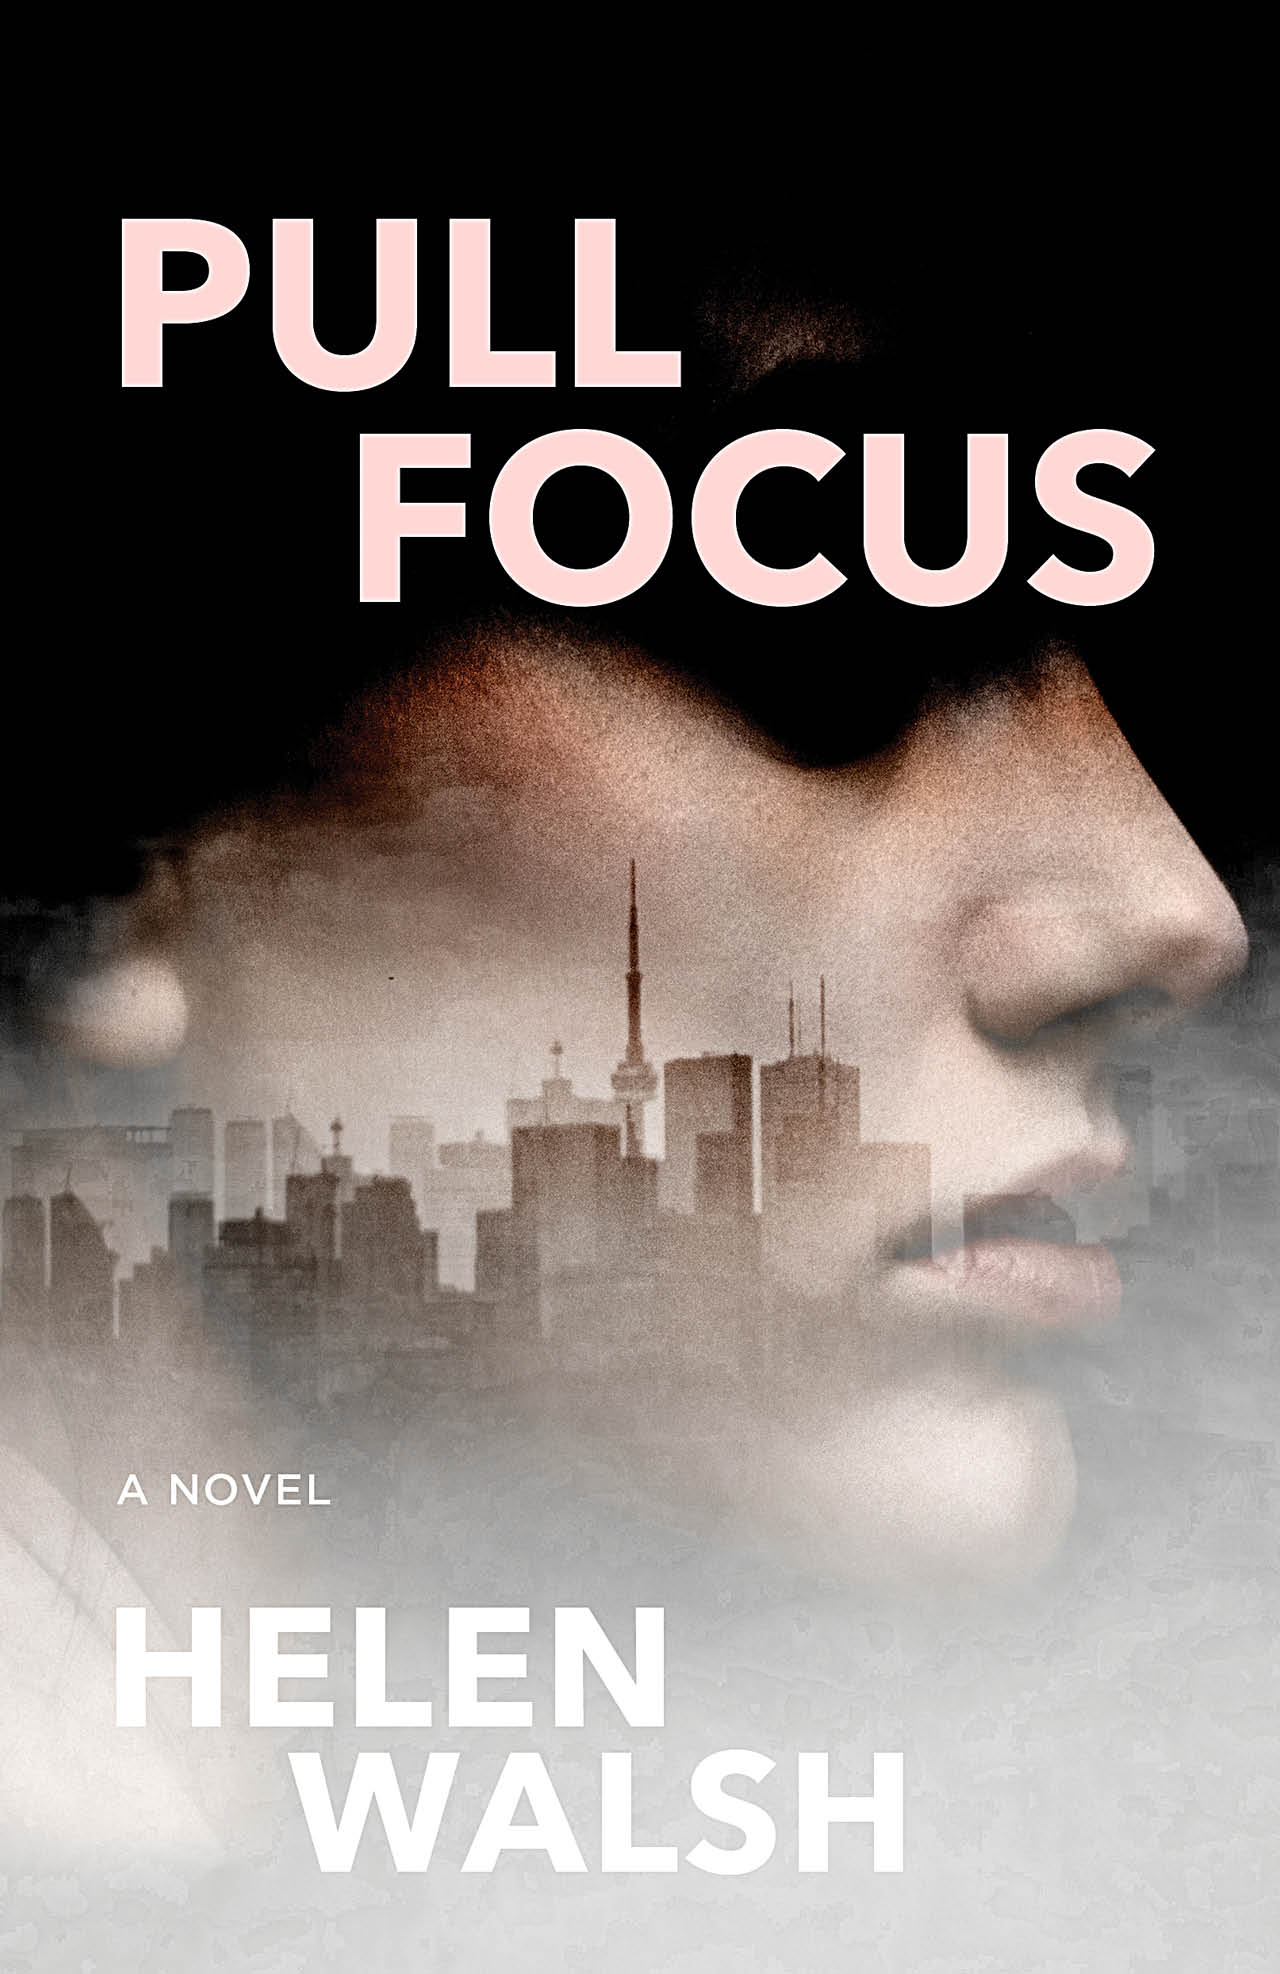 Pull Focus by Helen Walsh